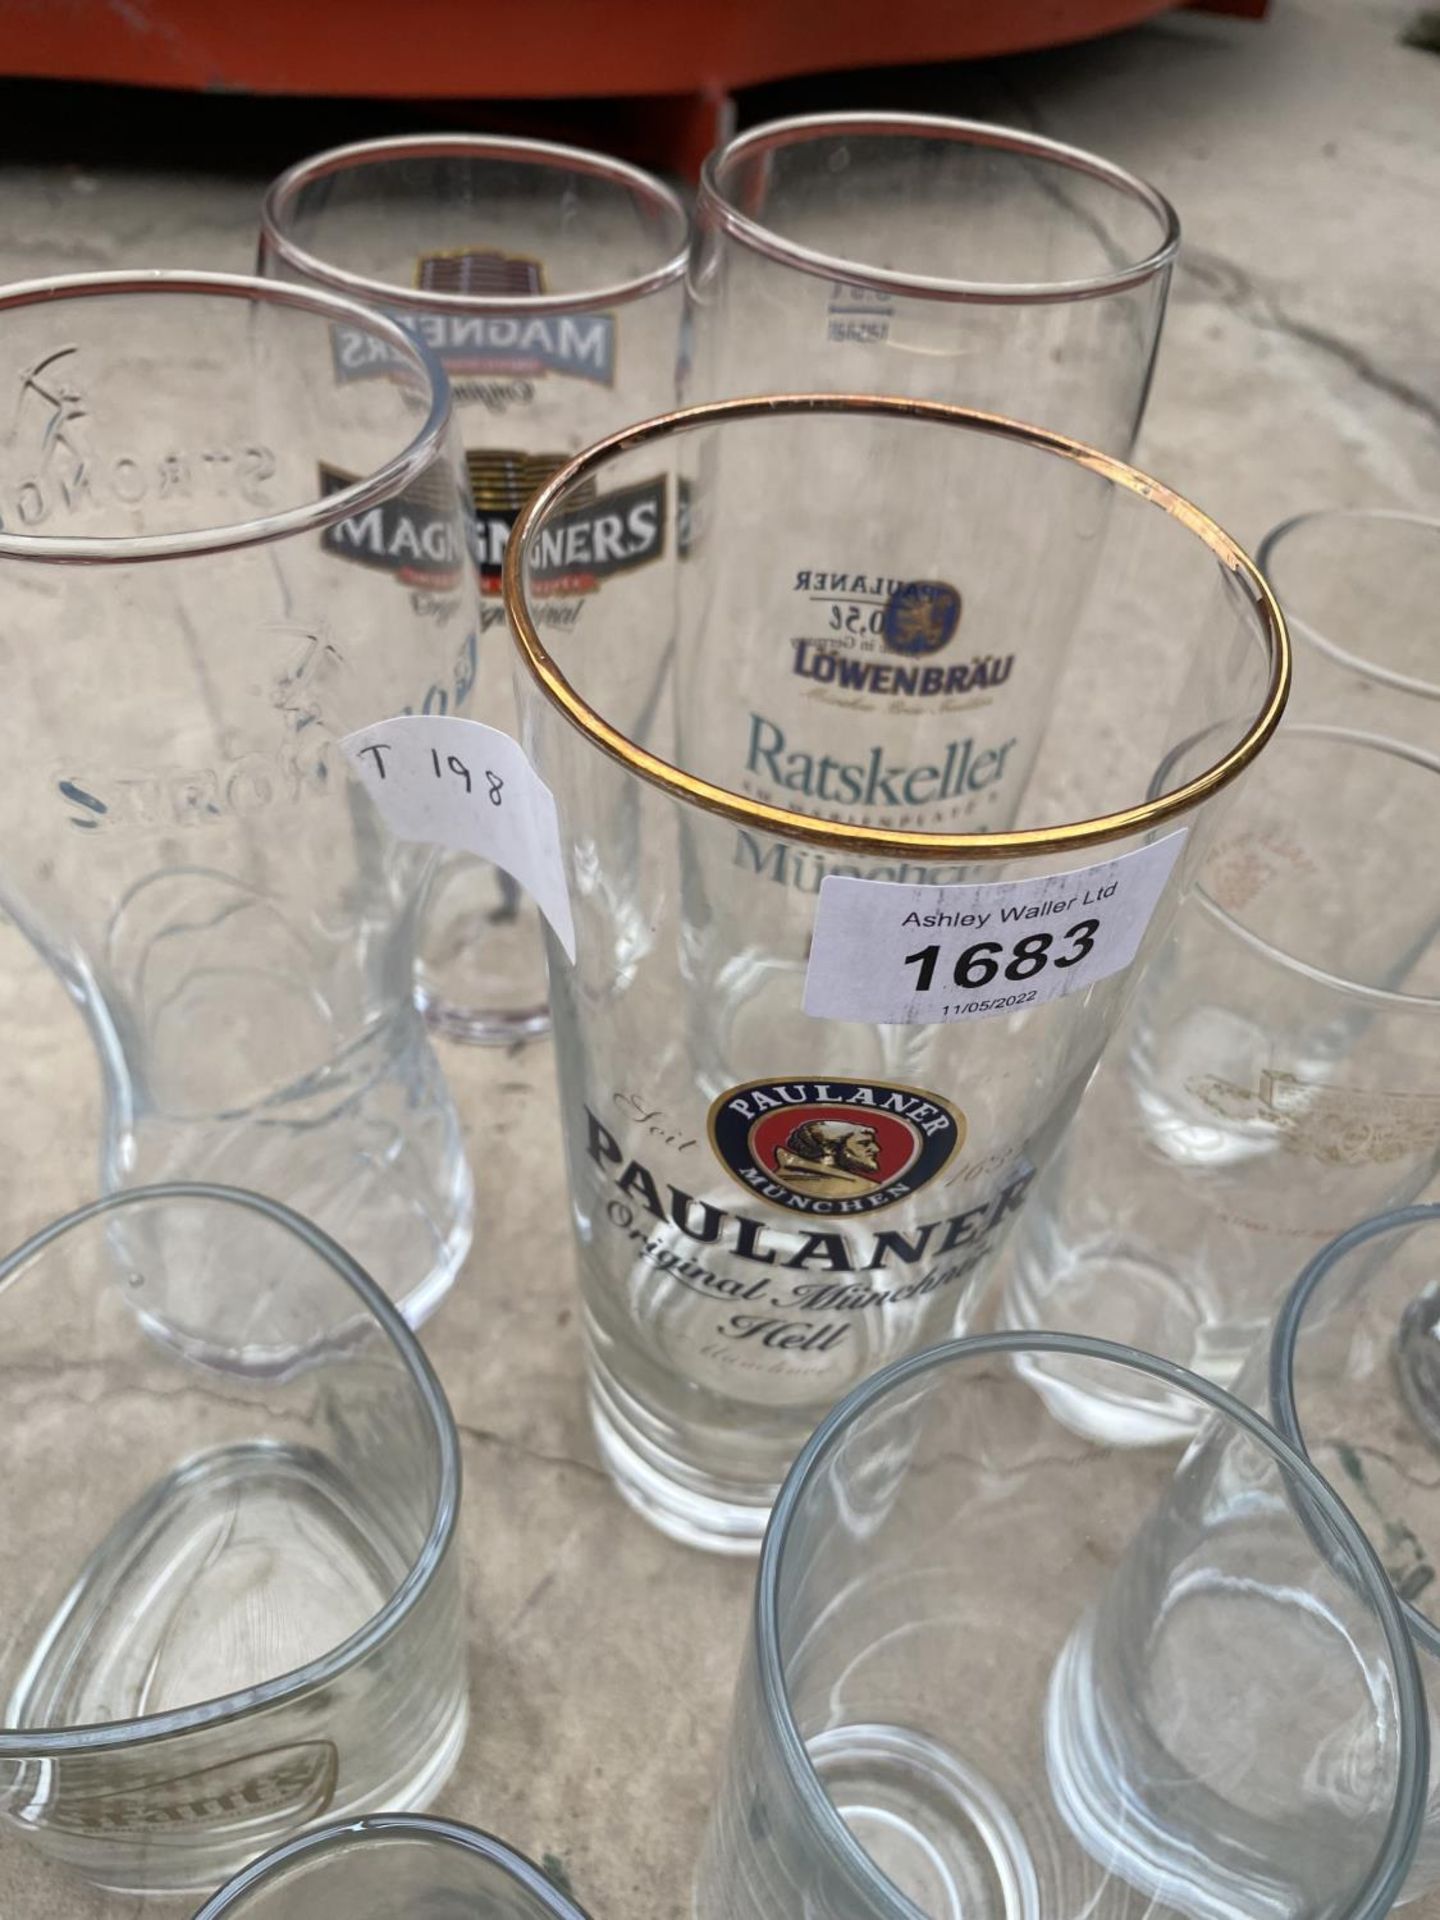 AN ASSORTMENT OF BRANDED BEER GLASSES - Image 3 of 3